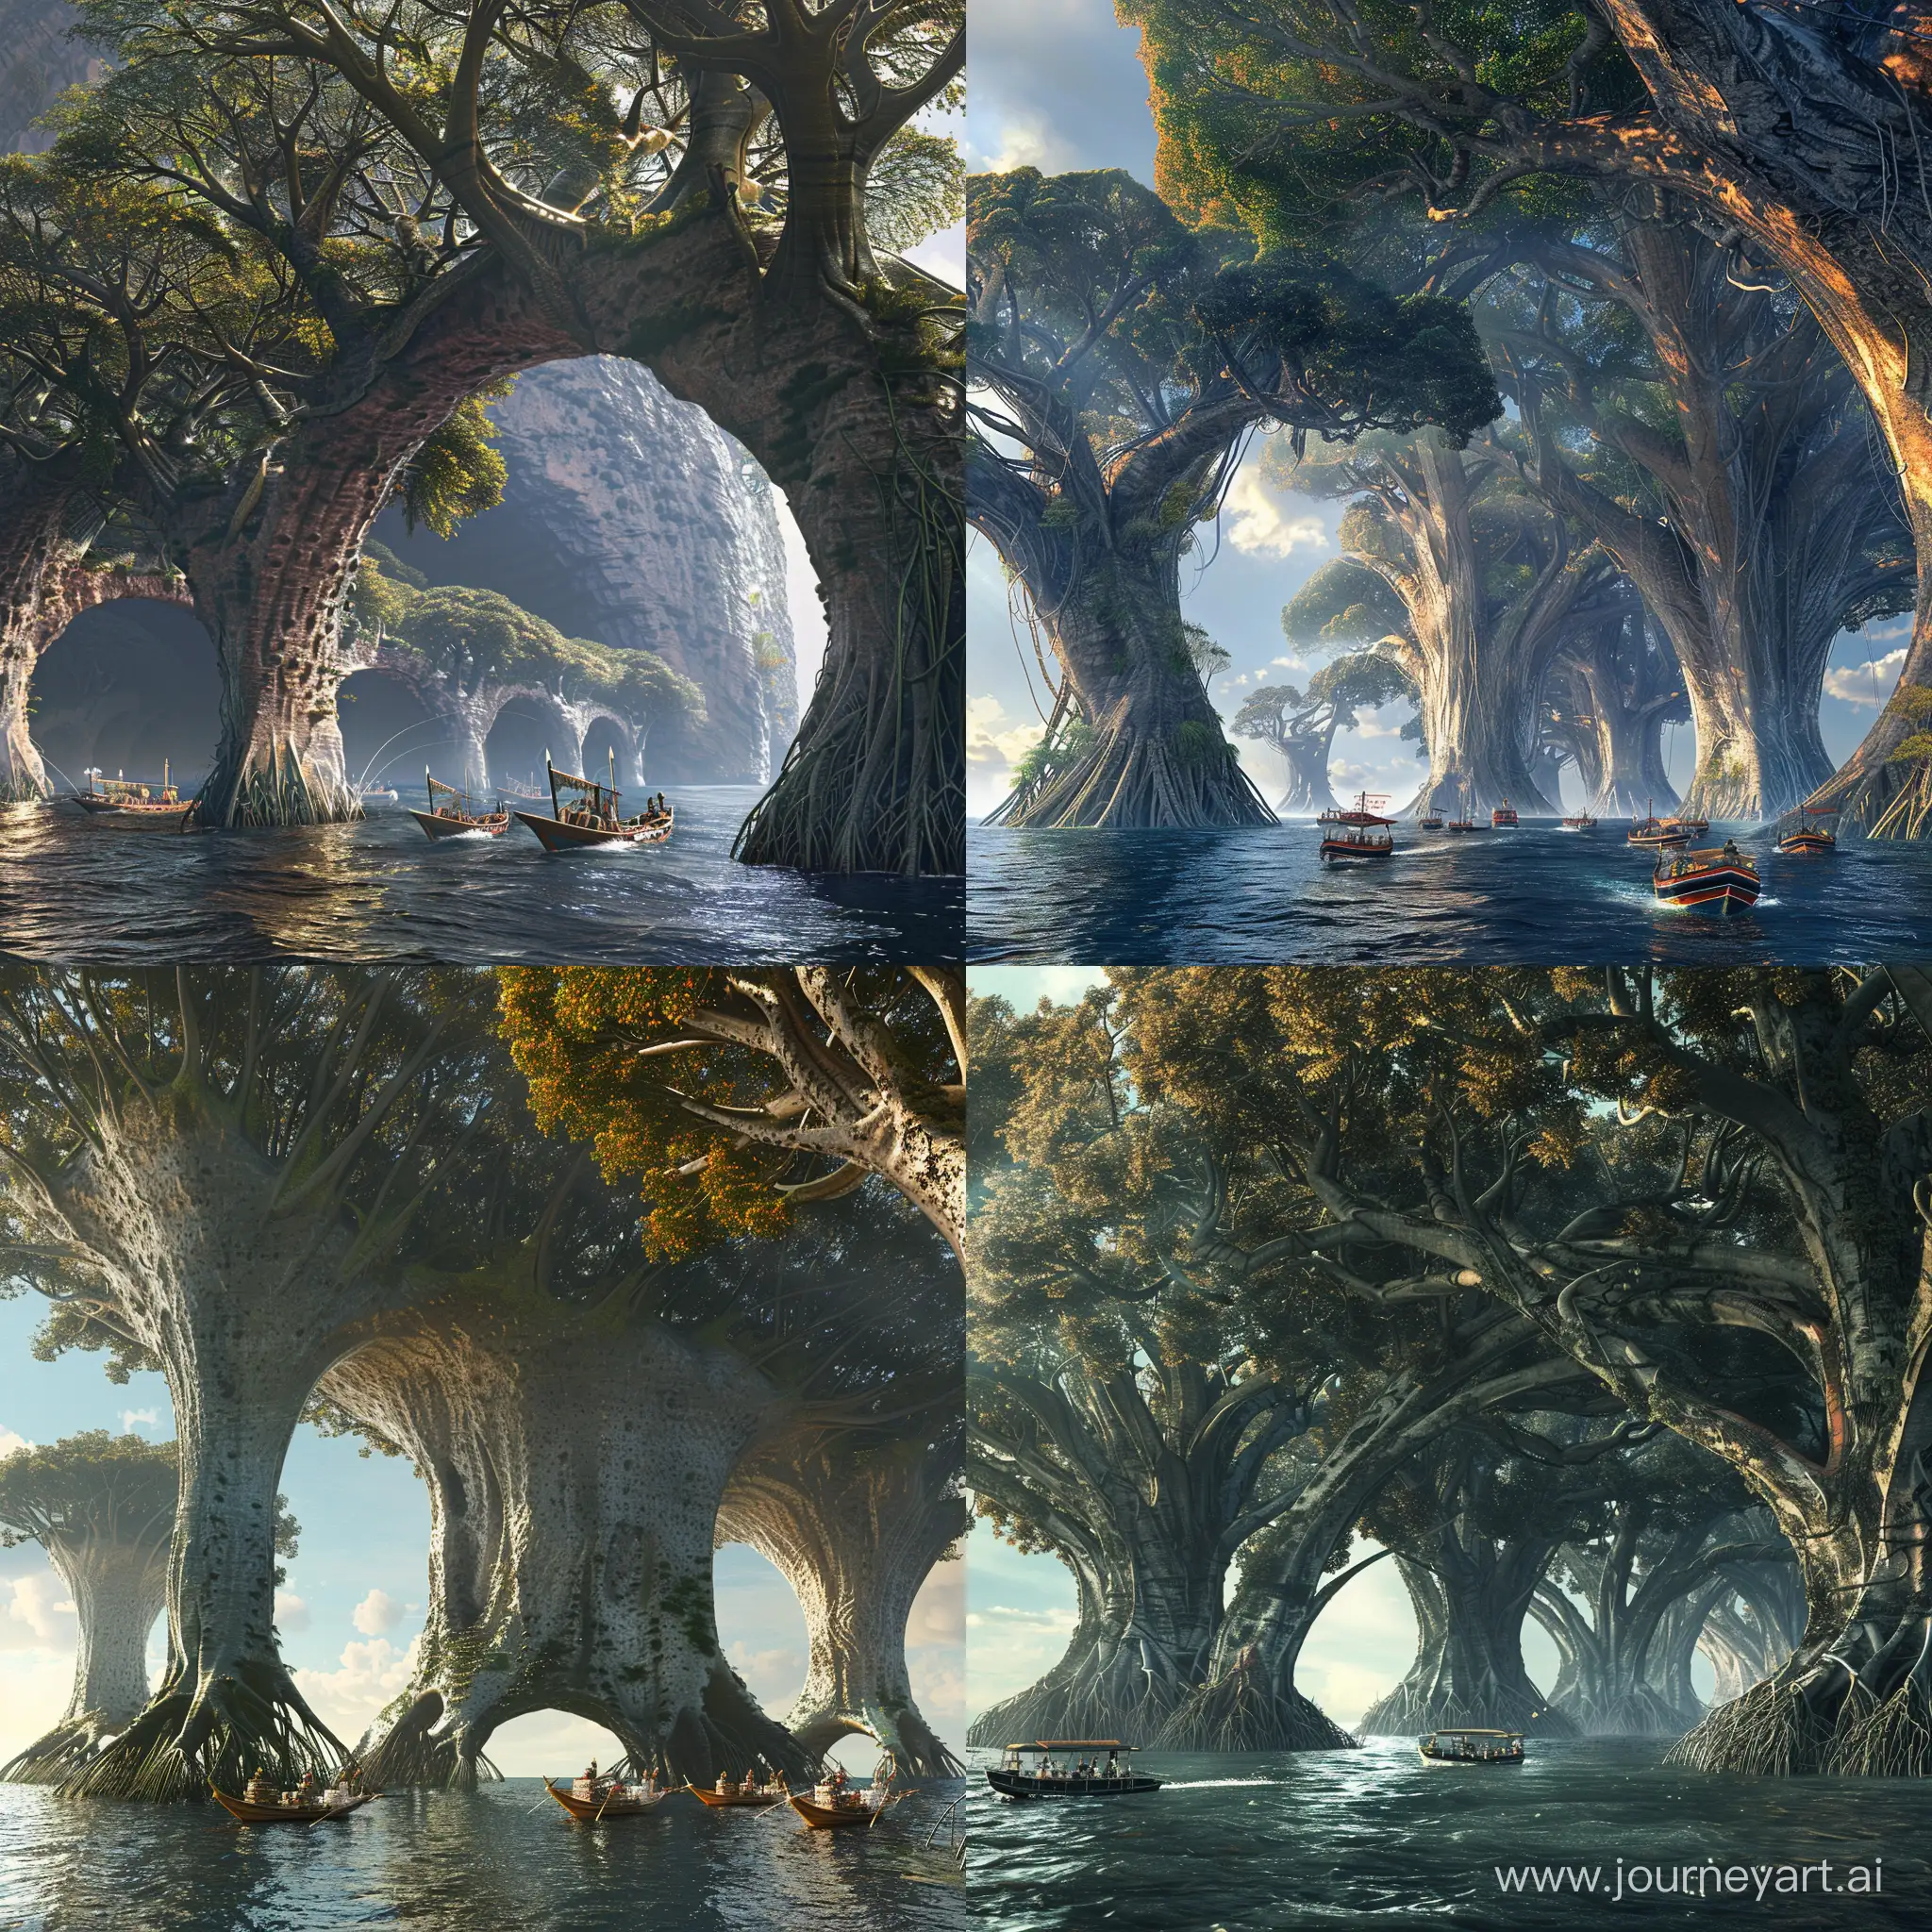 Gigantic-Mangrove-Trees-on-an-Alien-Planet-with-Native-Boats-Passing-Through